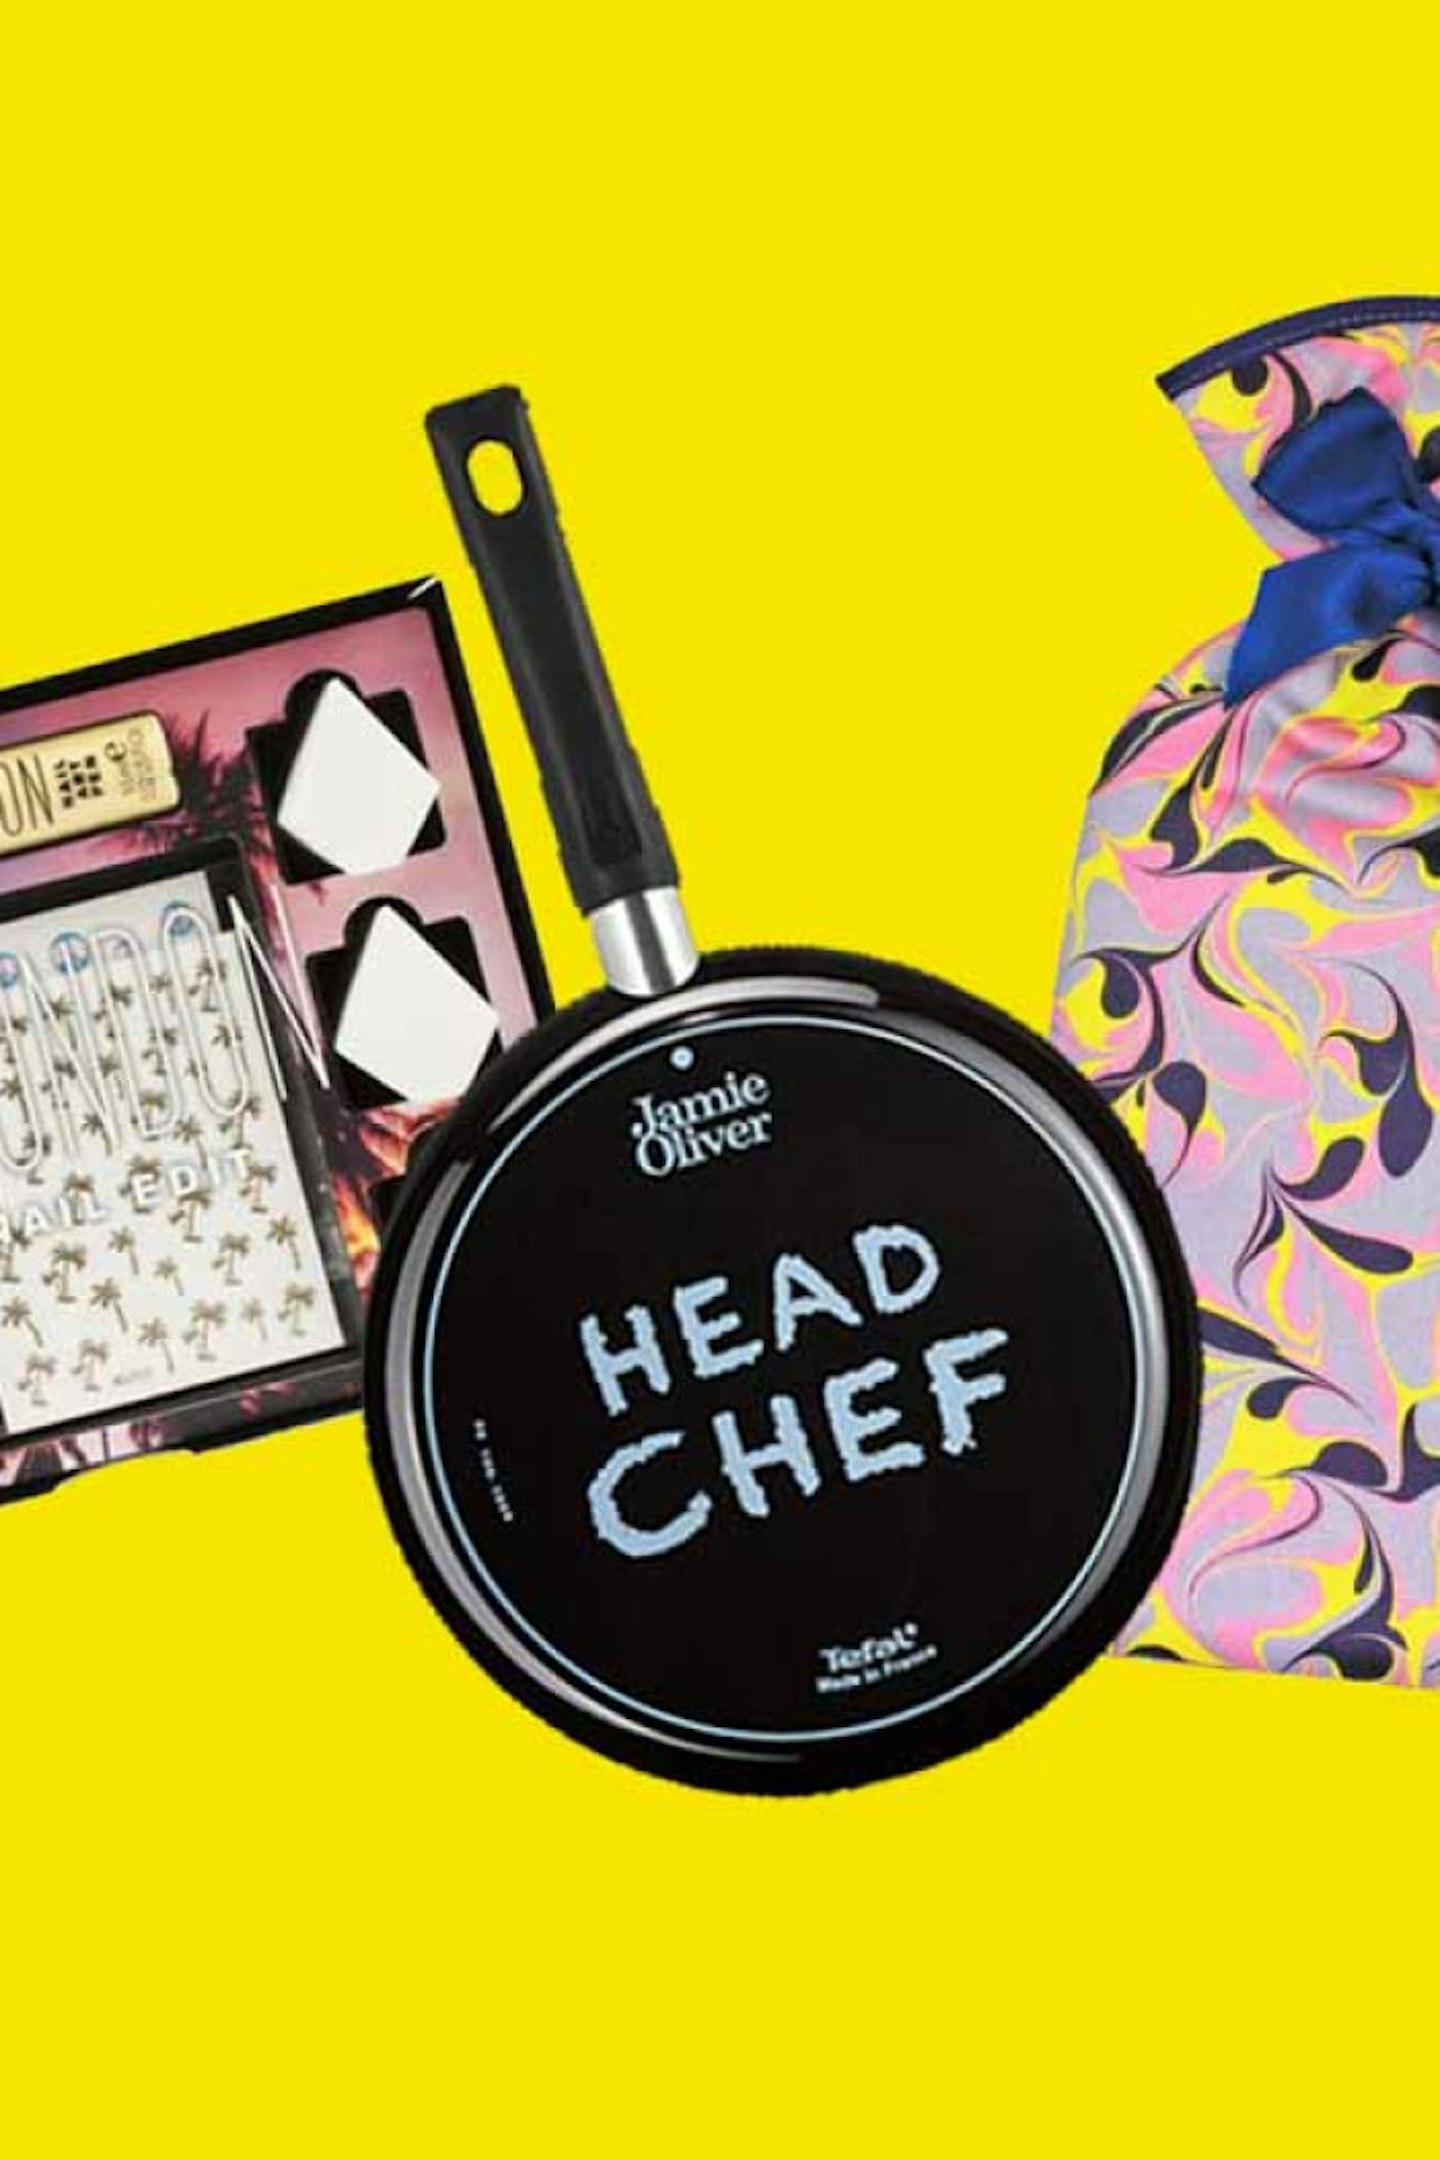 GALLERY >> 15 Perfect Presents For All Your Secret Santa Duties